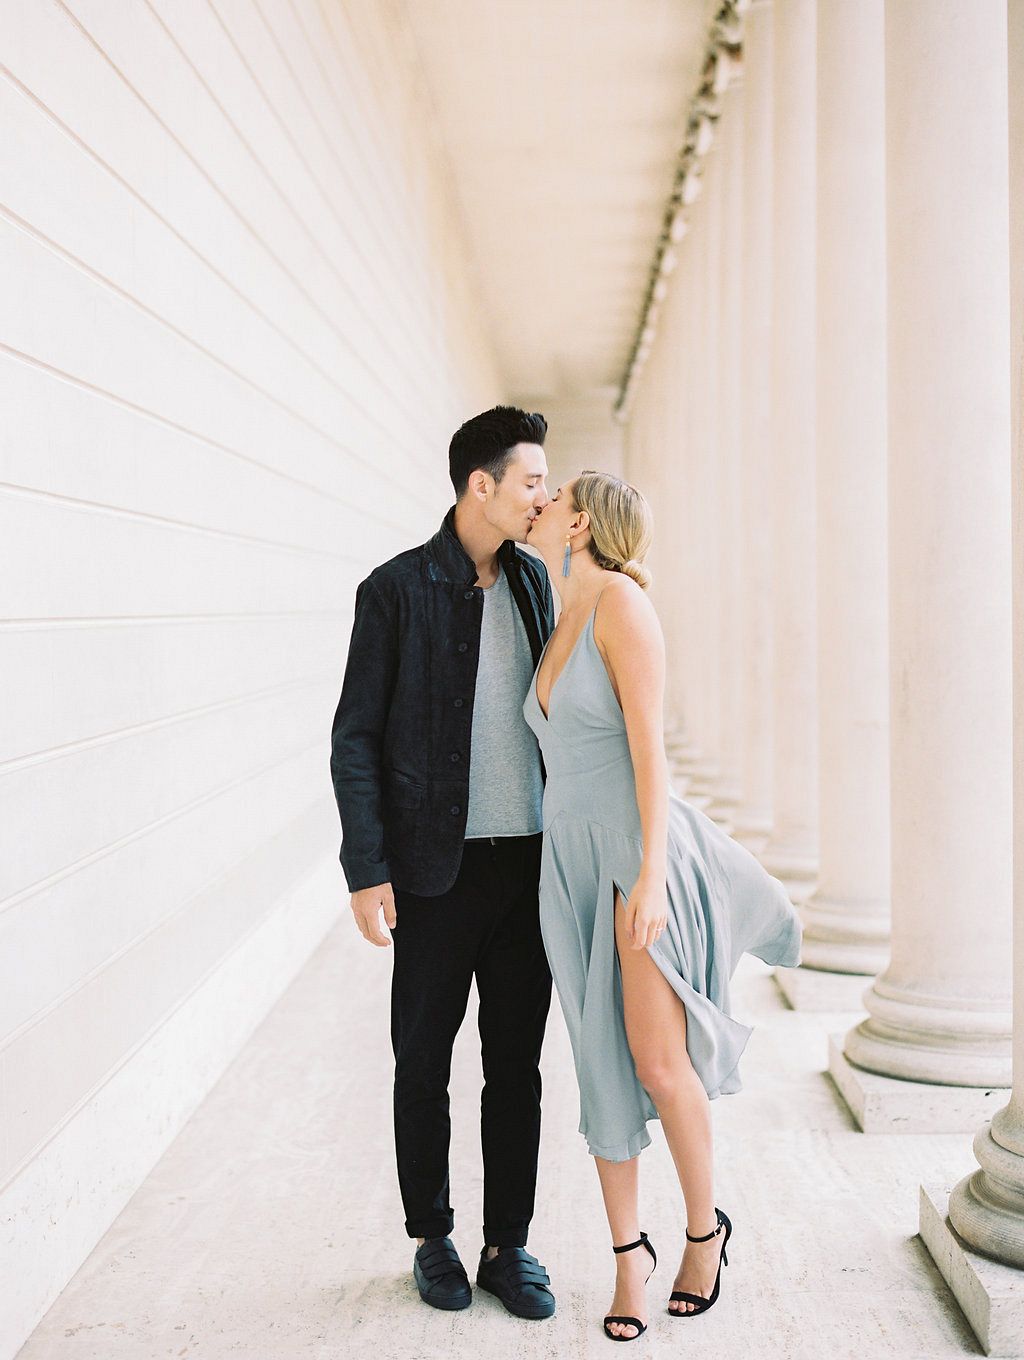 Lauren and Colin's Modern Engagement Session